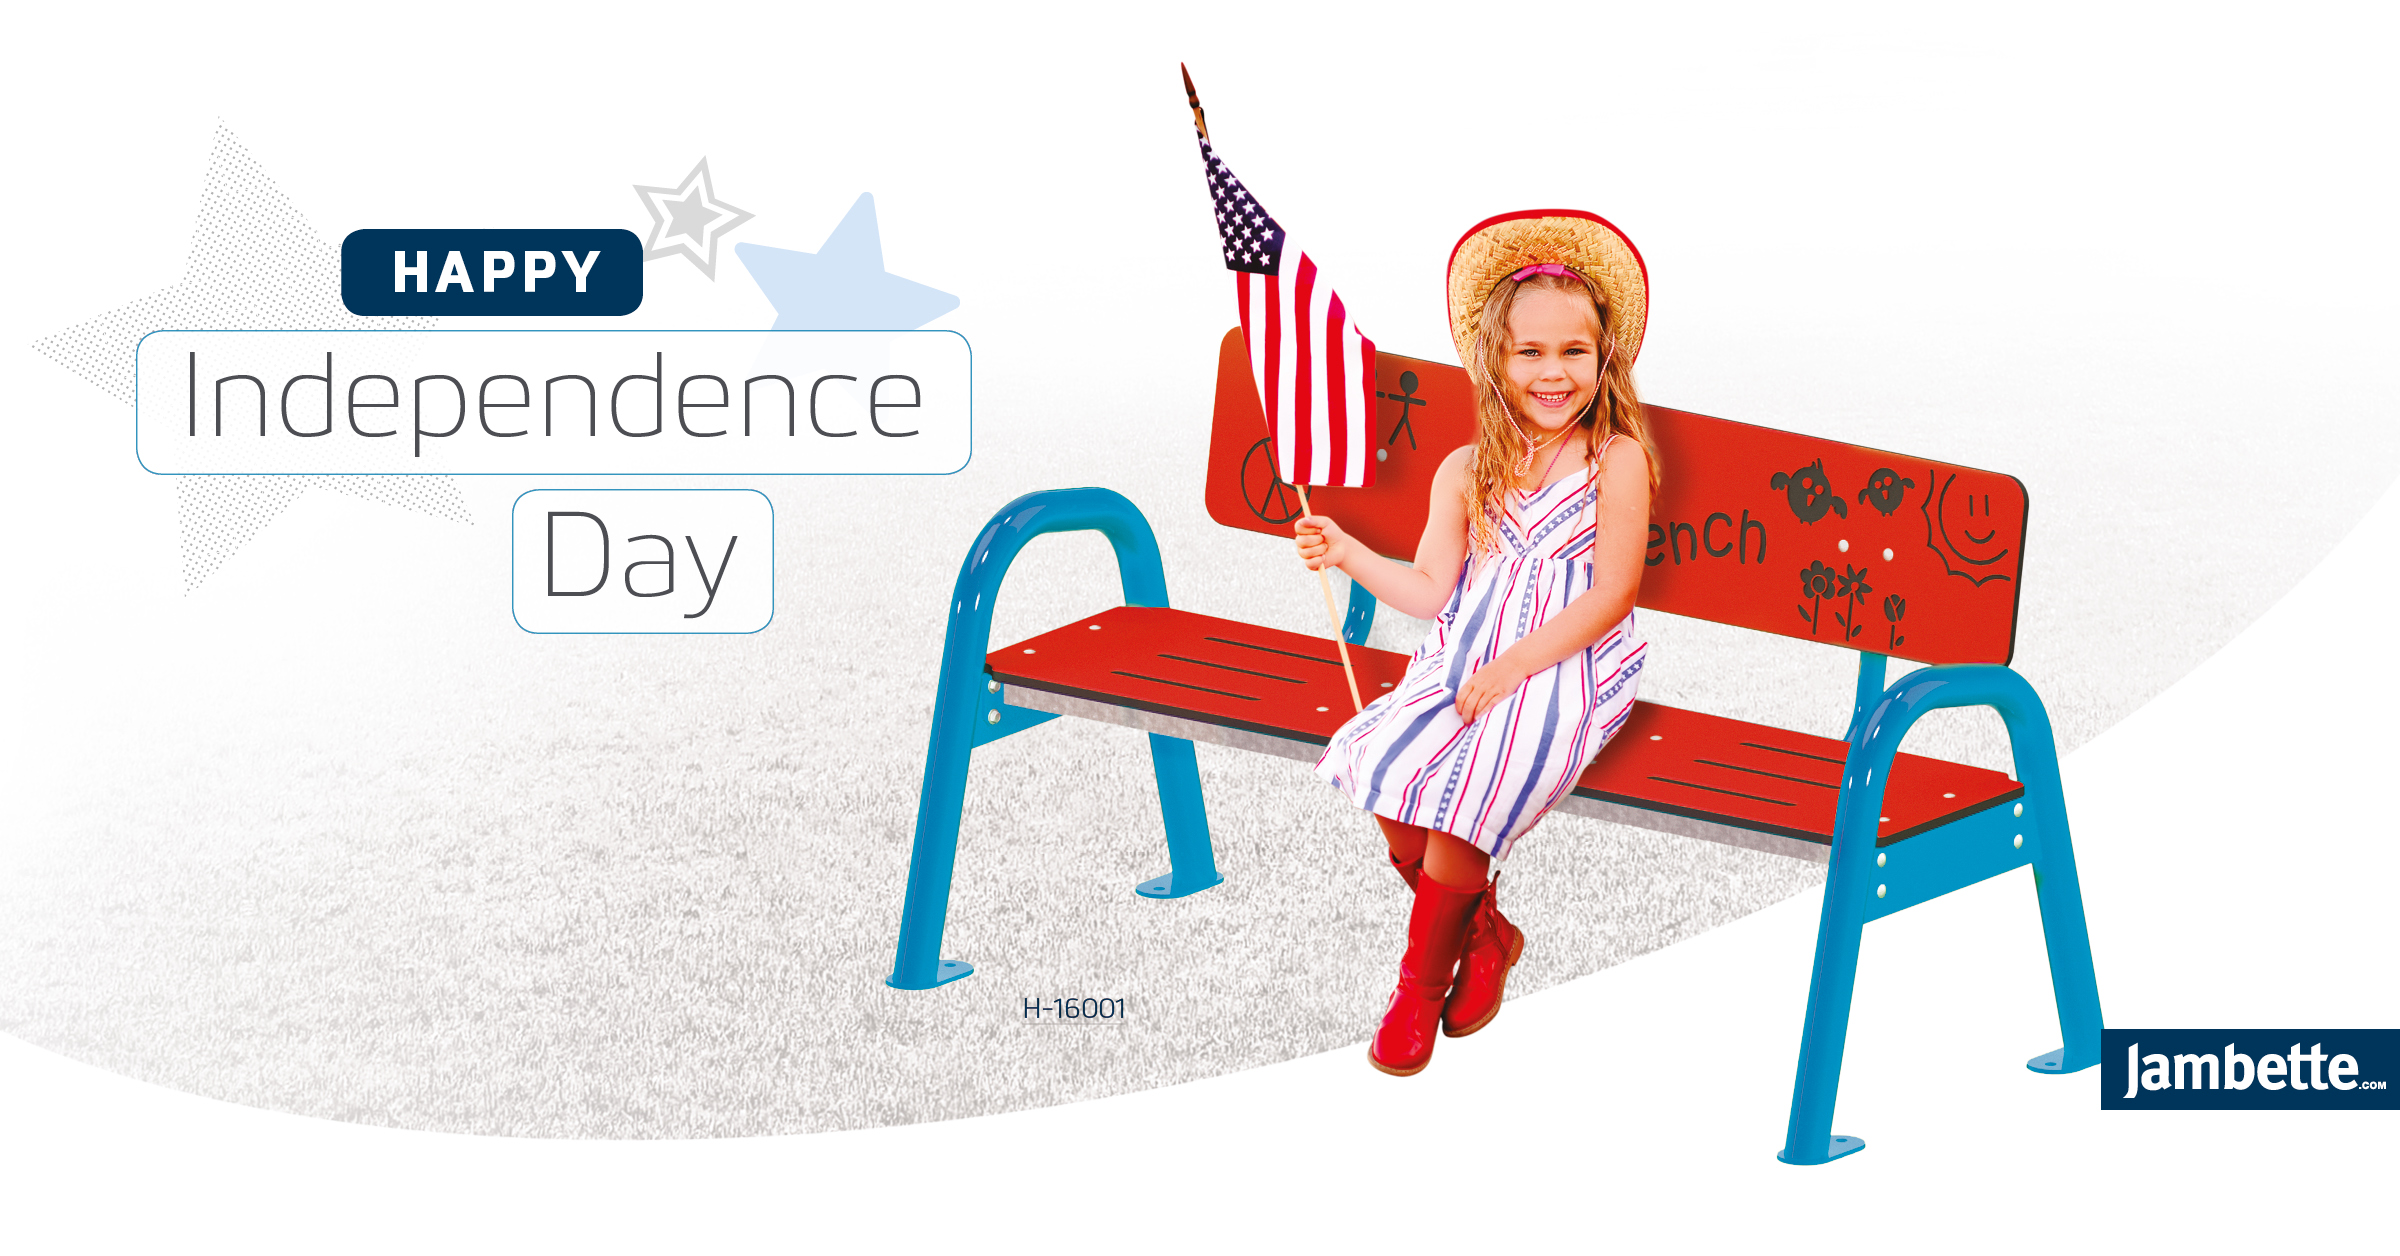 Happy Independence Day from Jambette